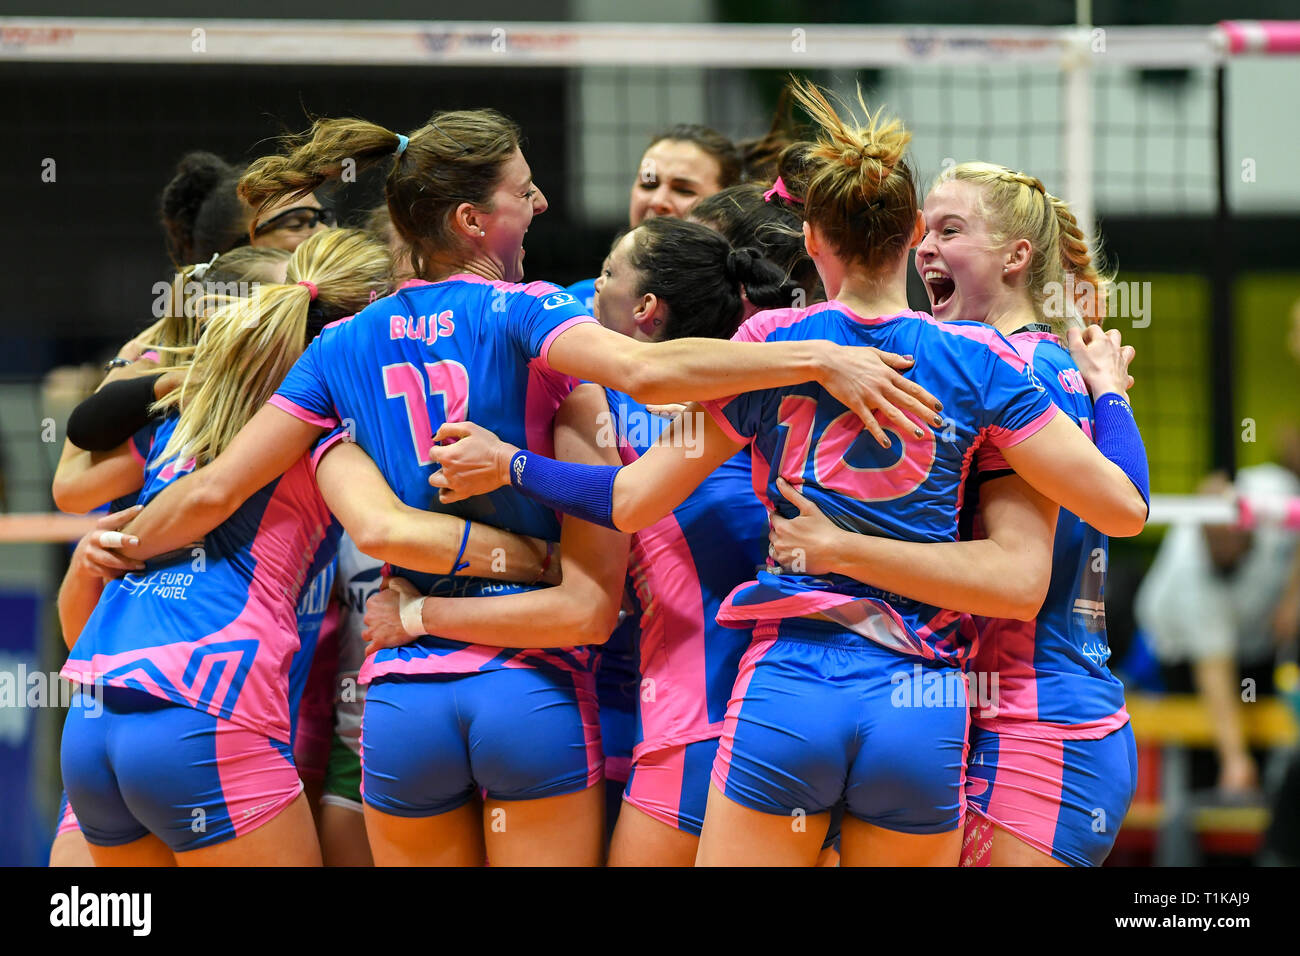 Candy Arena, Monza, Italy. 27th March, 2019. CEV Volleyball Challenge Cup women, Final, 2nd leg. Saugella Monza teal exultation after during the match between Saugella Monza and Aydin BBSK at the Candy Arena Italy.  Credit: Claudio Grassi/Alamy Live News Stock Photo